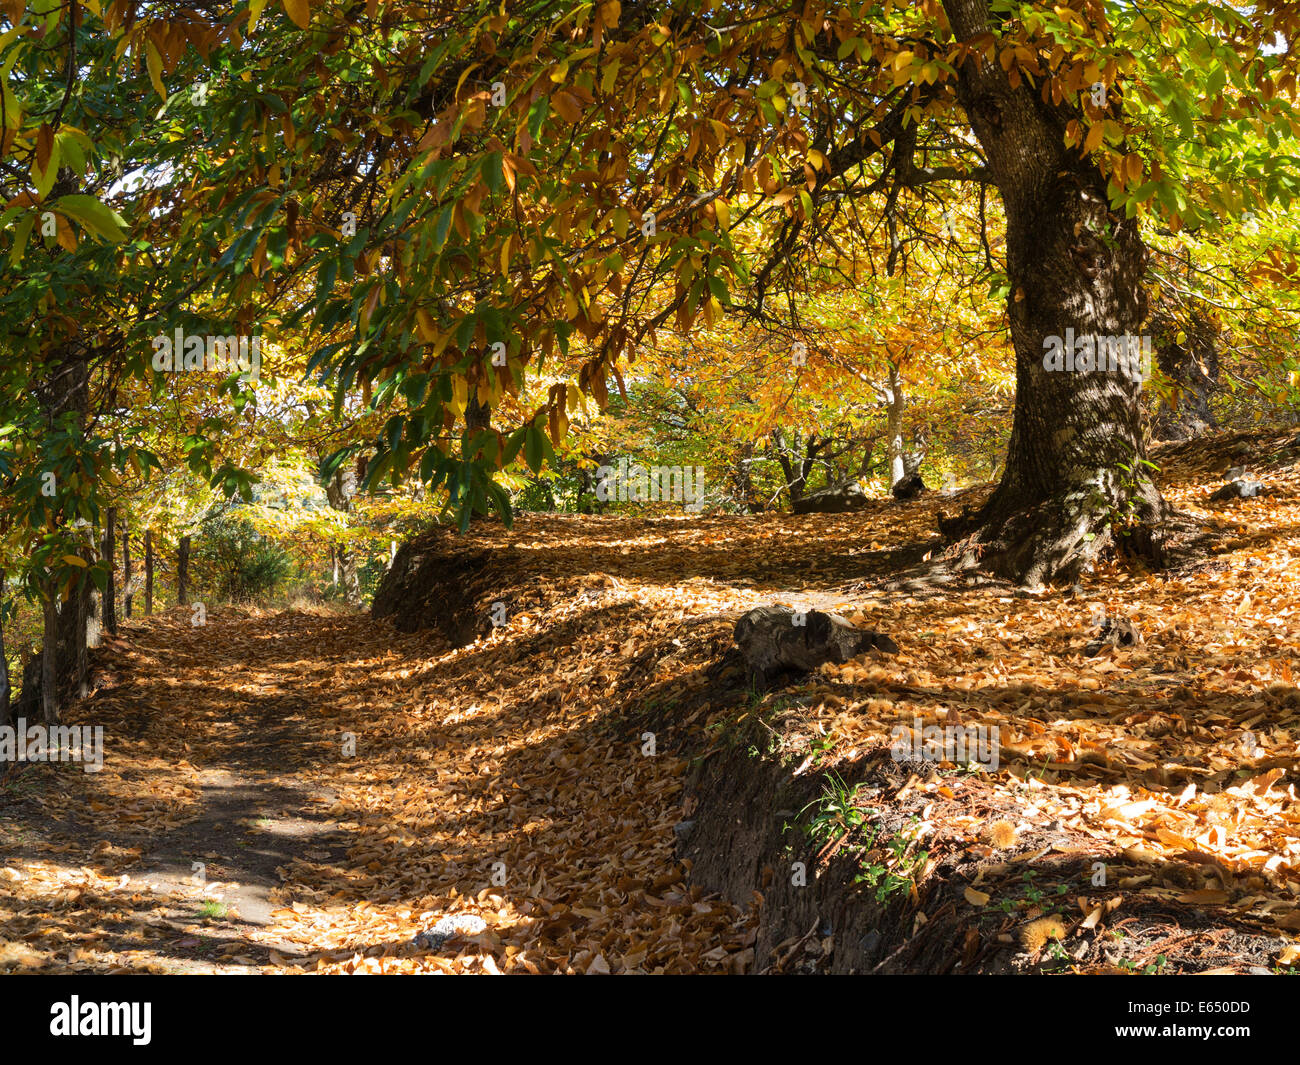 Sweet Chestnut (Castanea sativa) in autumn, Genal river valley, Málaga province, Andalusia, Spain Stock Photo